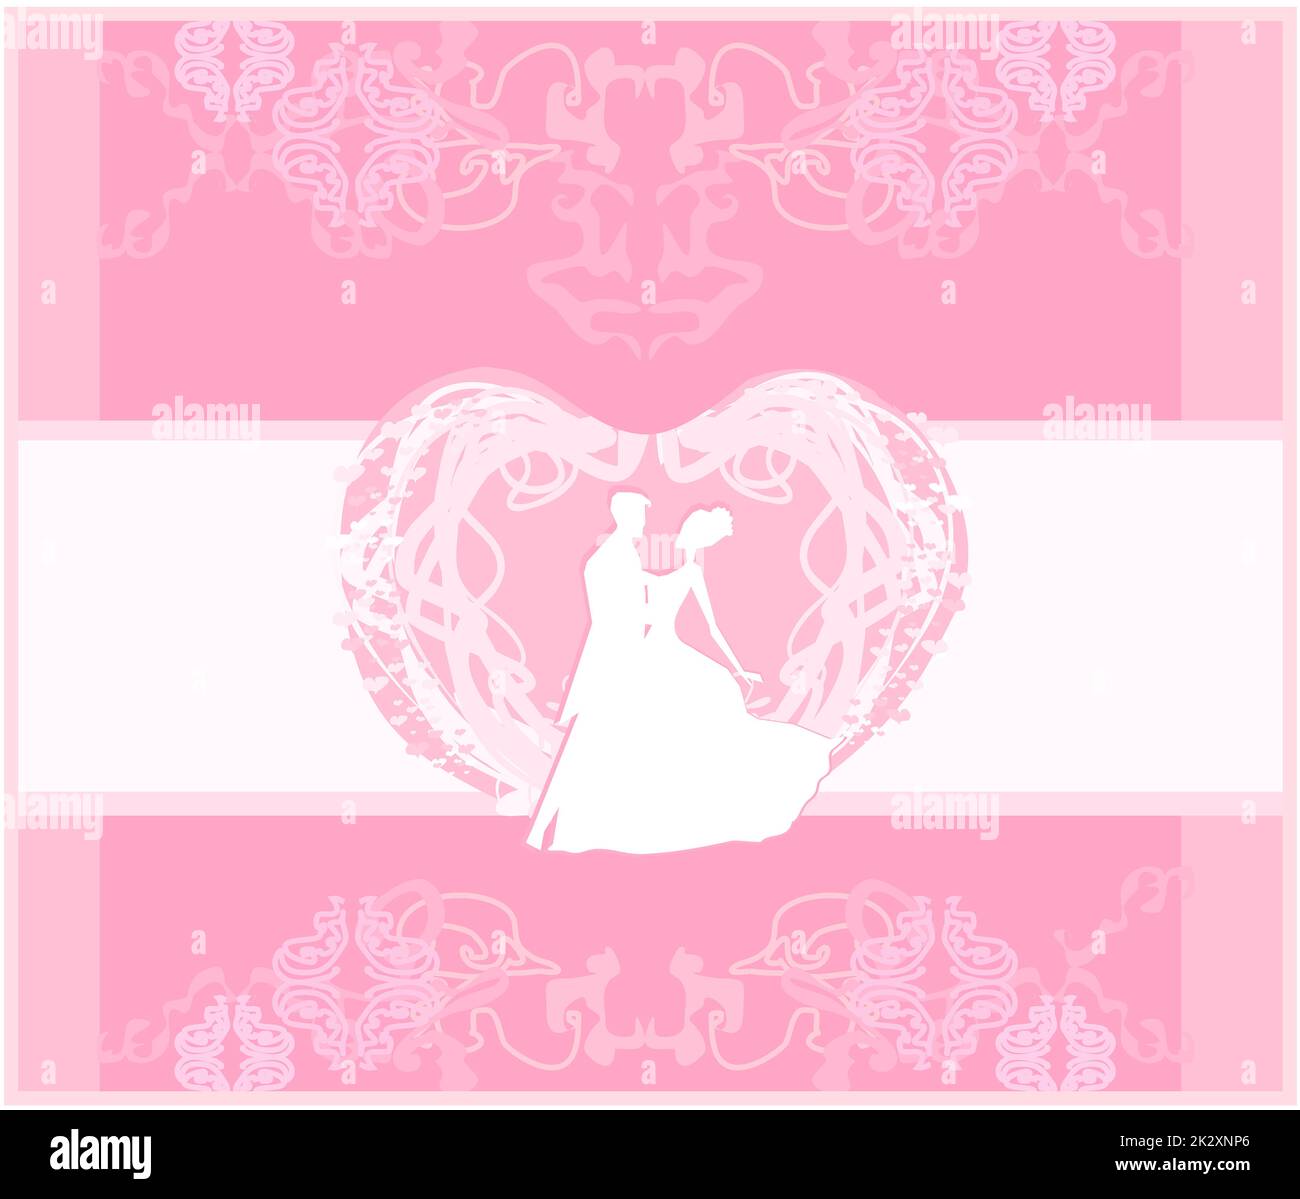 Ballroom dancers - invitation mariage silhouette Banque D'Images